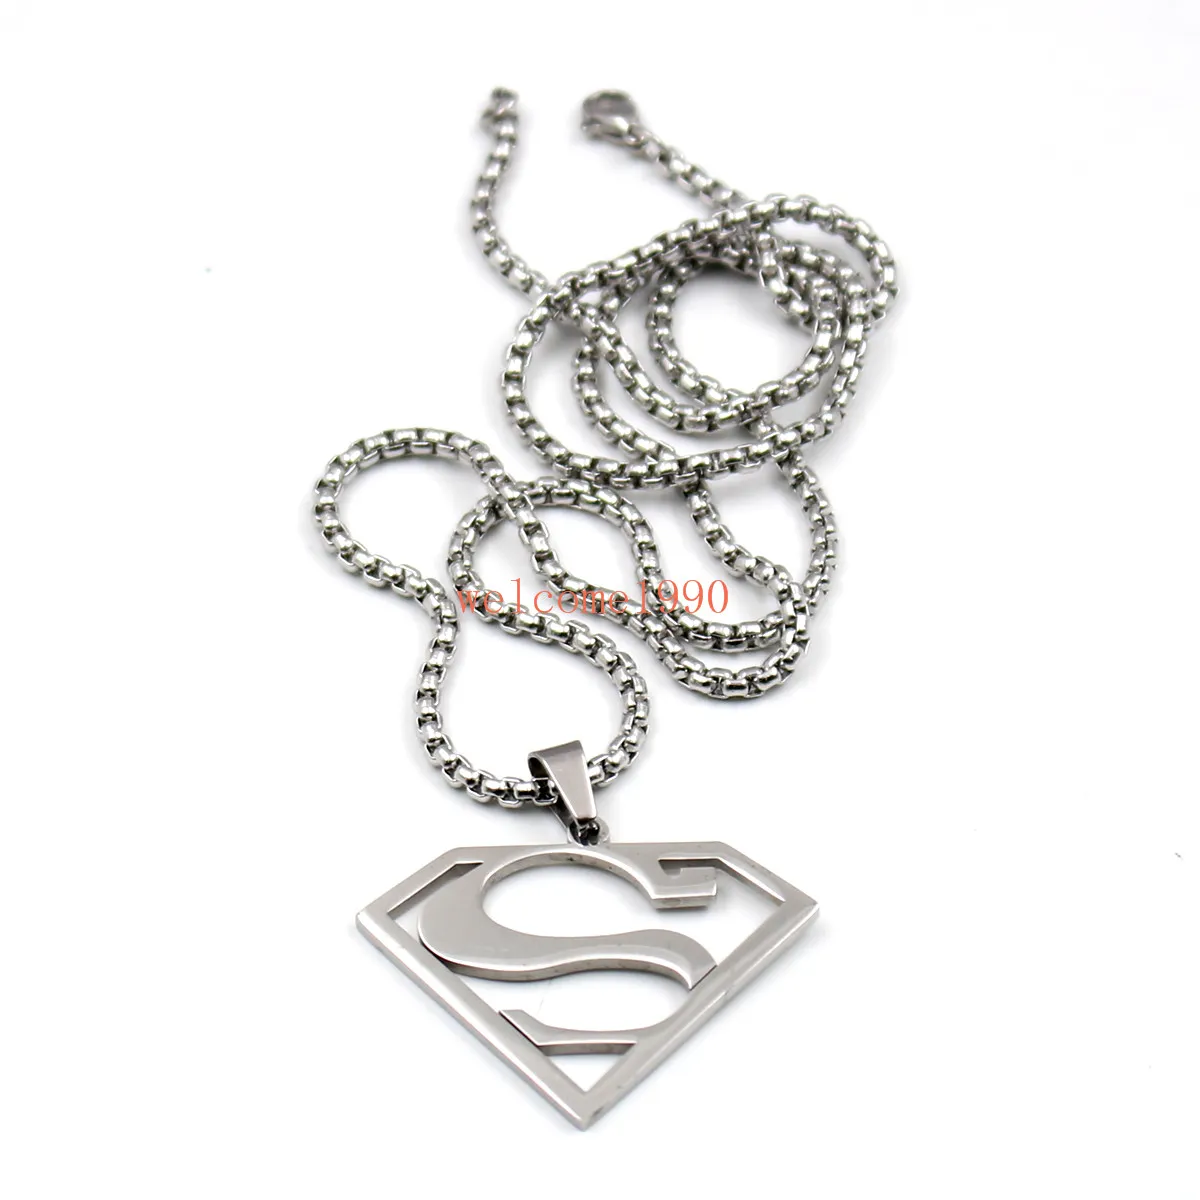 Gold silver black Stainless Steel 15 inch Superman logo Pendant Men039s Gifts Fashion Rolo chain necklace 24 inch lenght4013632